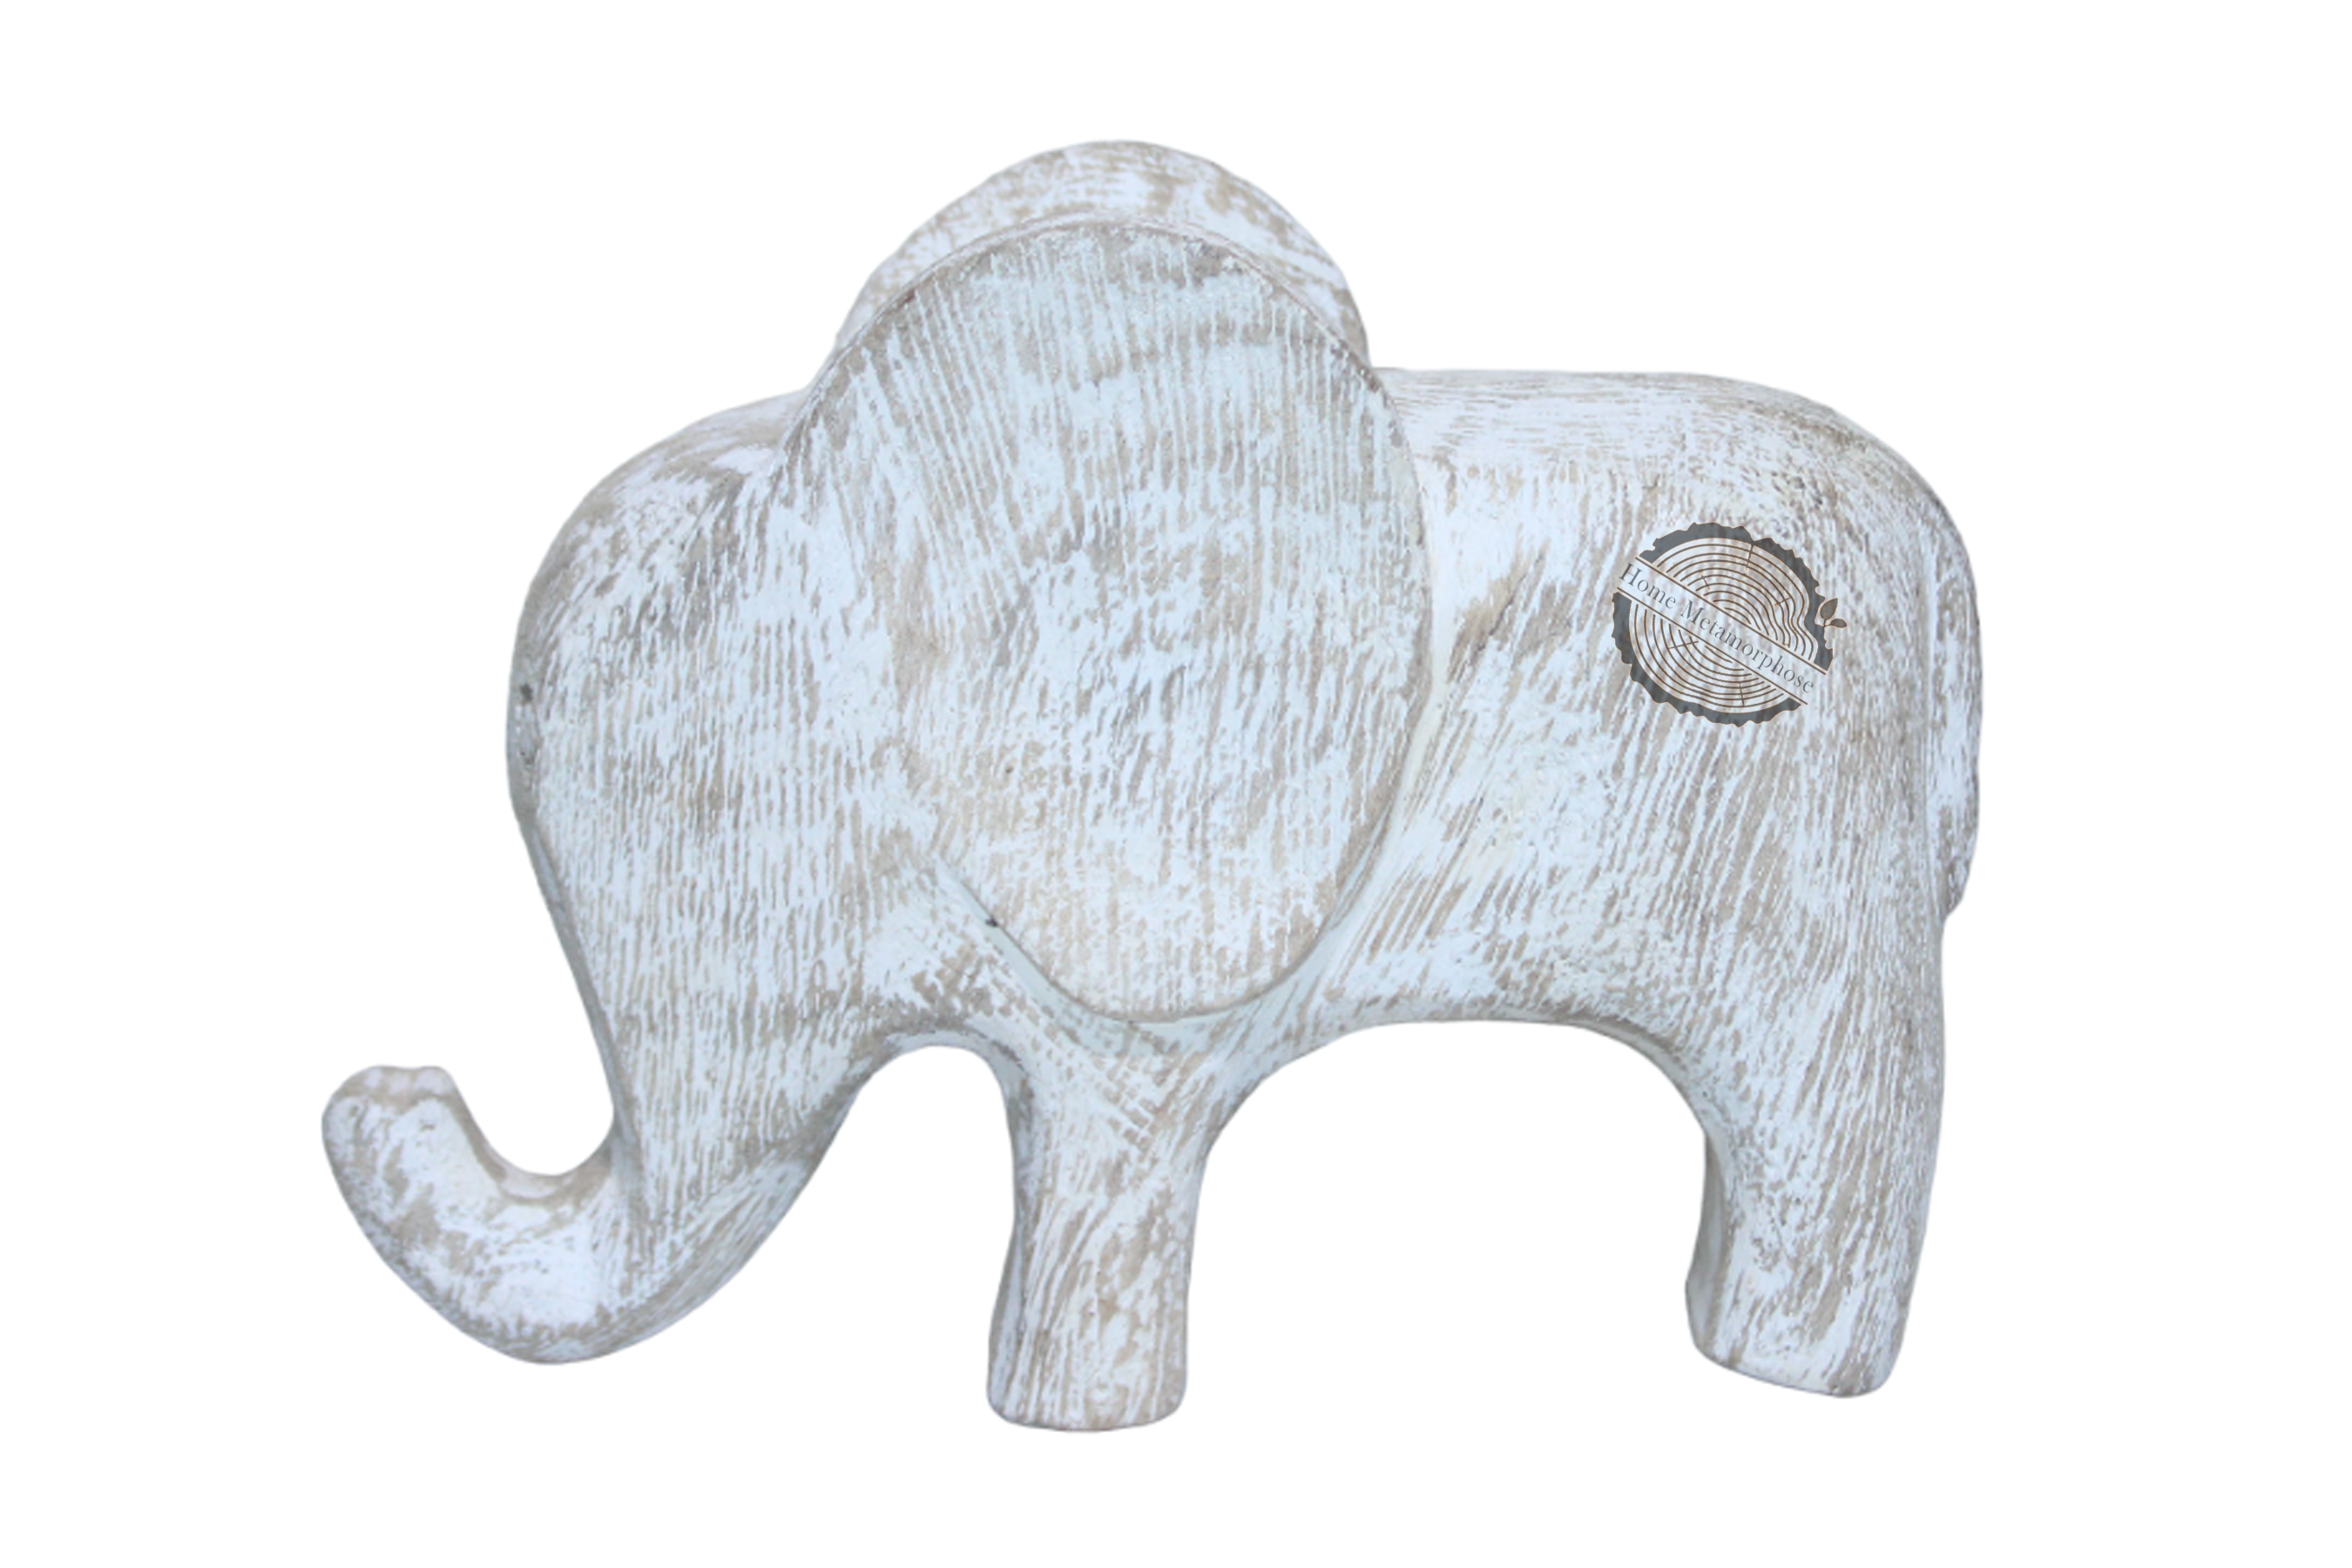 Wooden Elephant Table Décor And Paperweight, Decorative Table Accent And Functional Table Decor, Shelf Decor Gift Item